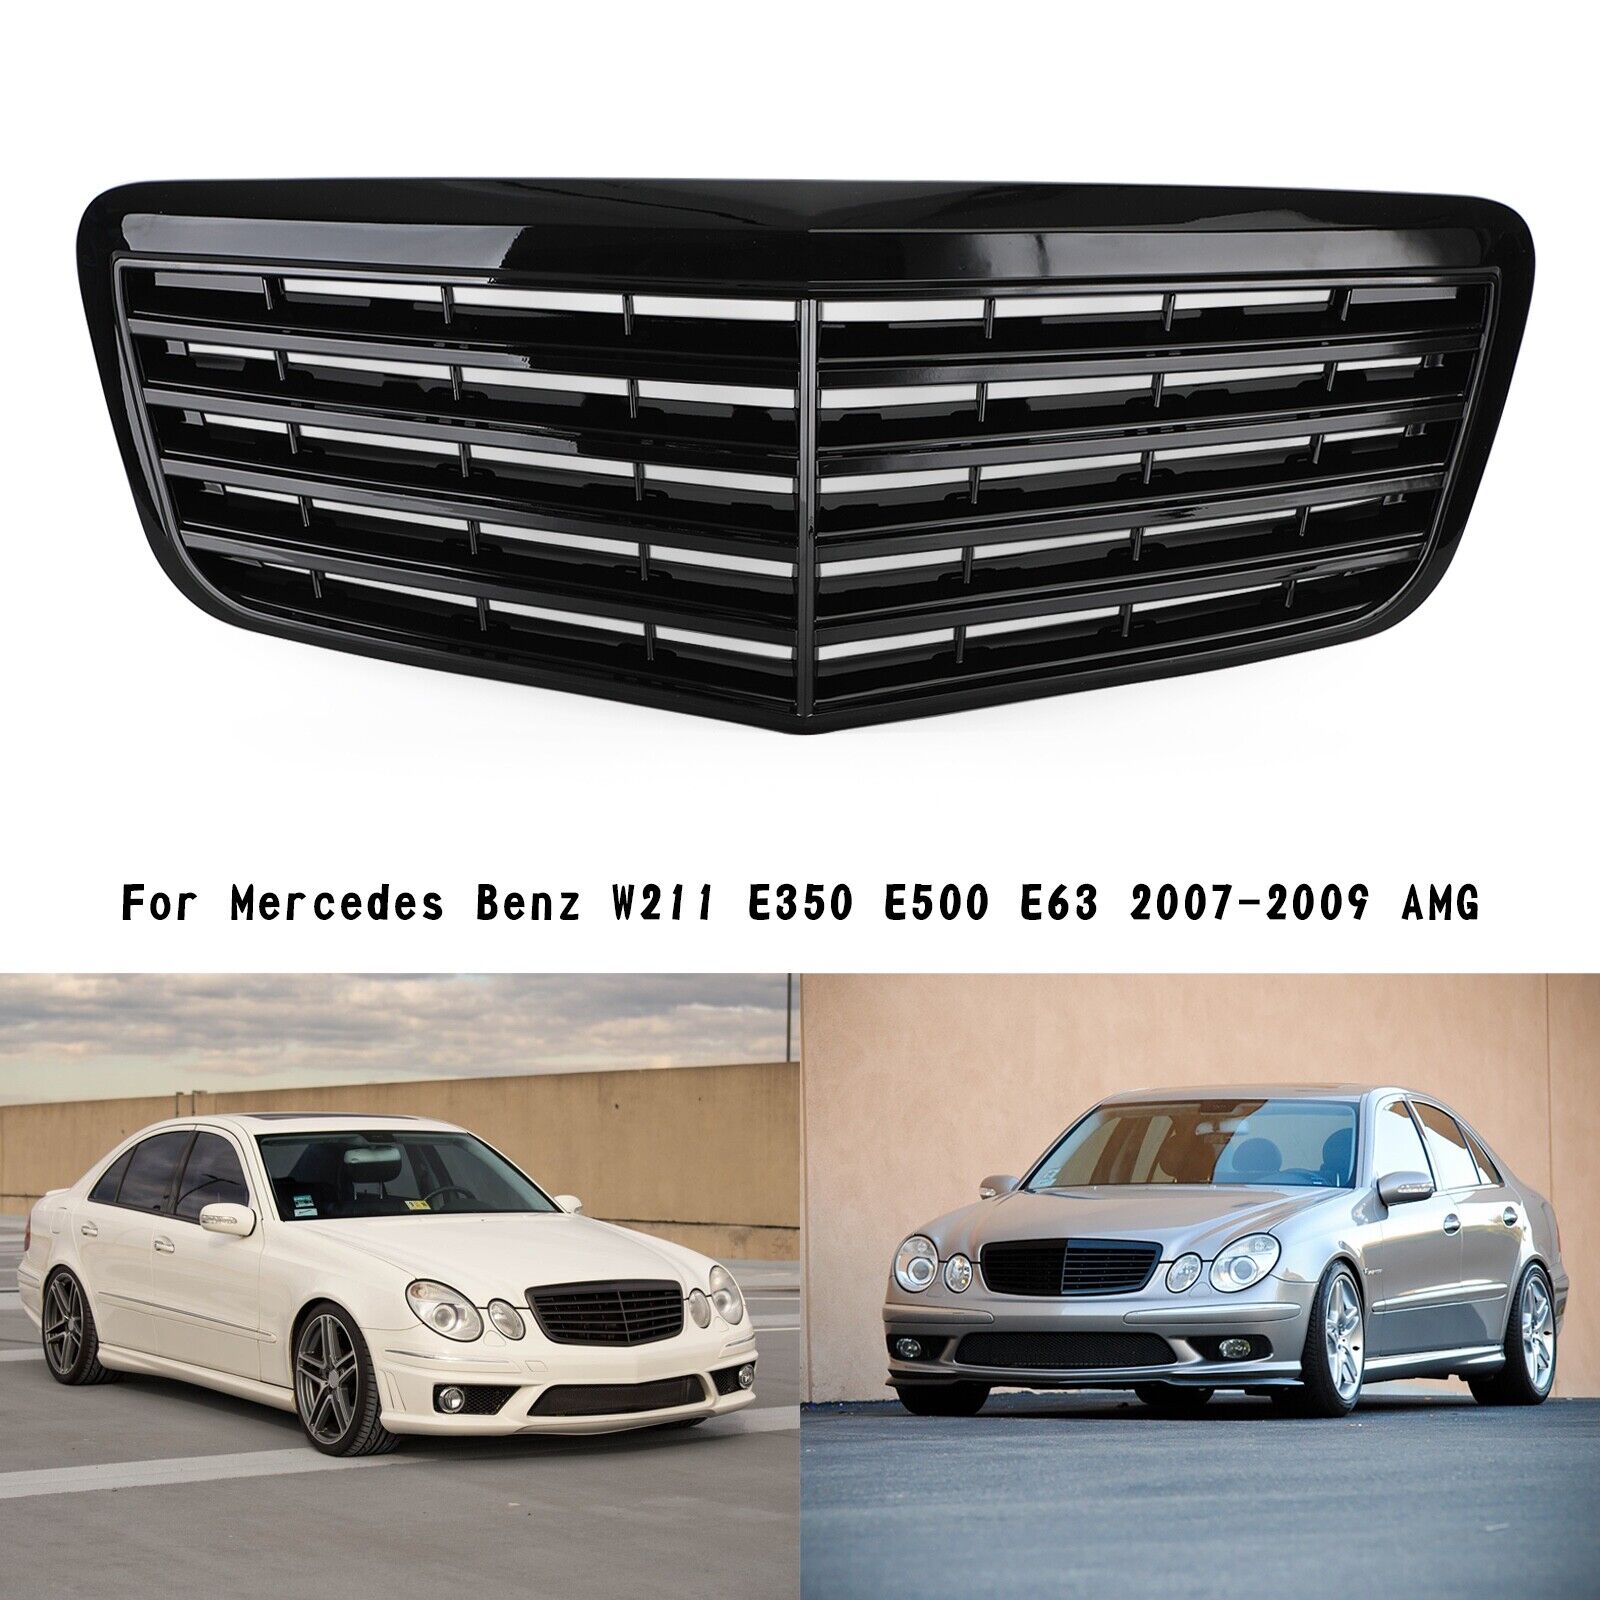 AMG Style Grille Grill For 2007-2009 Mercedes Benz W211 E350 E500 Gloss Black